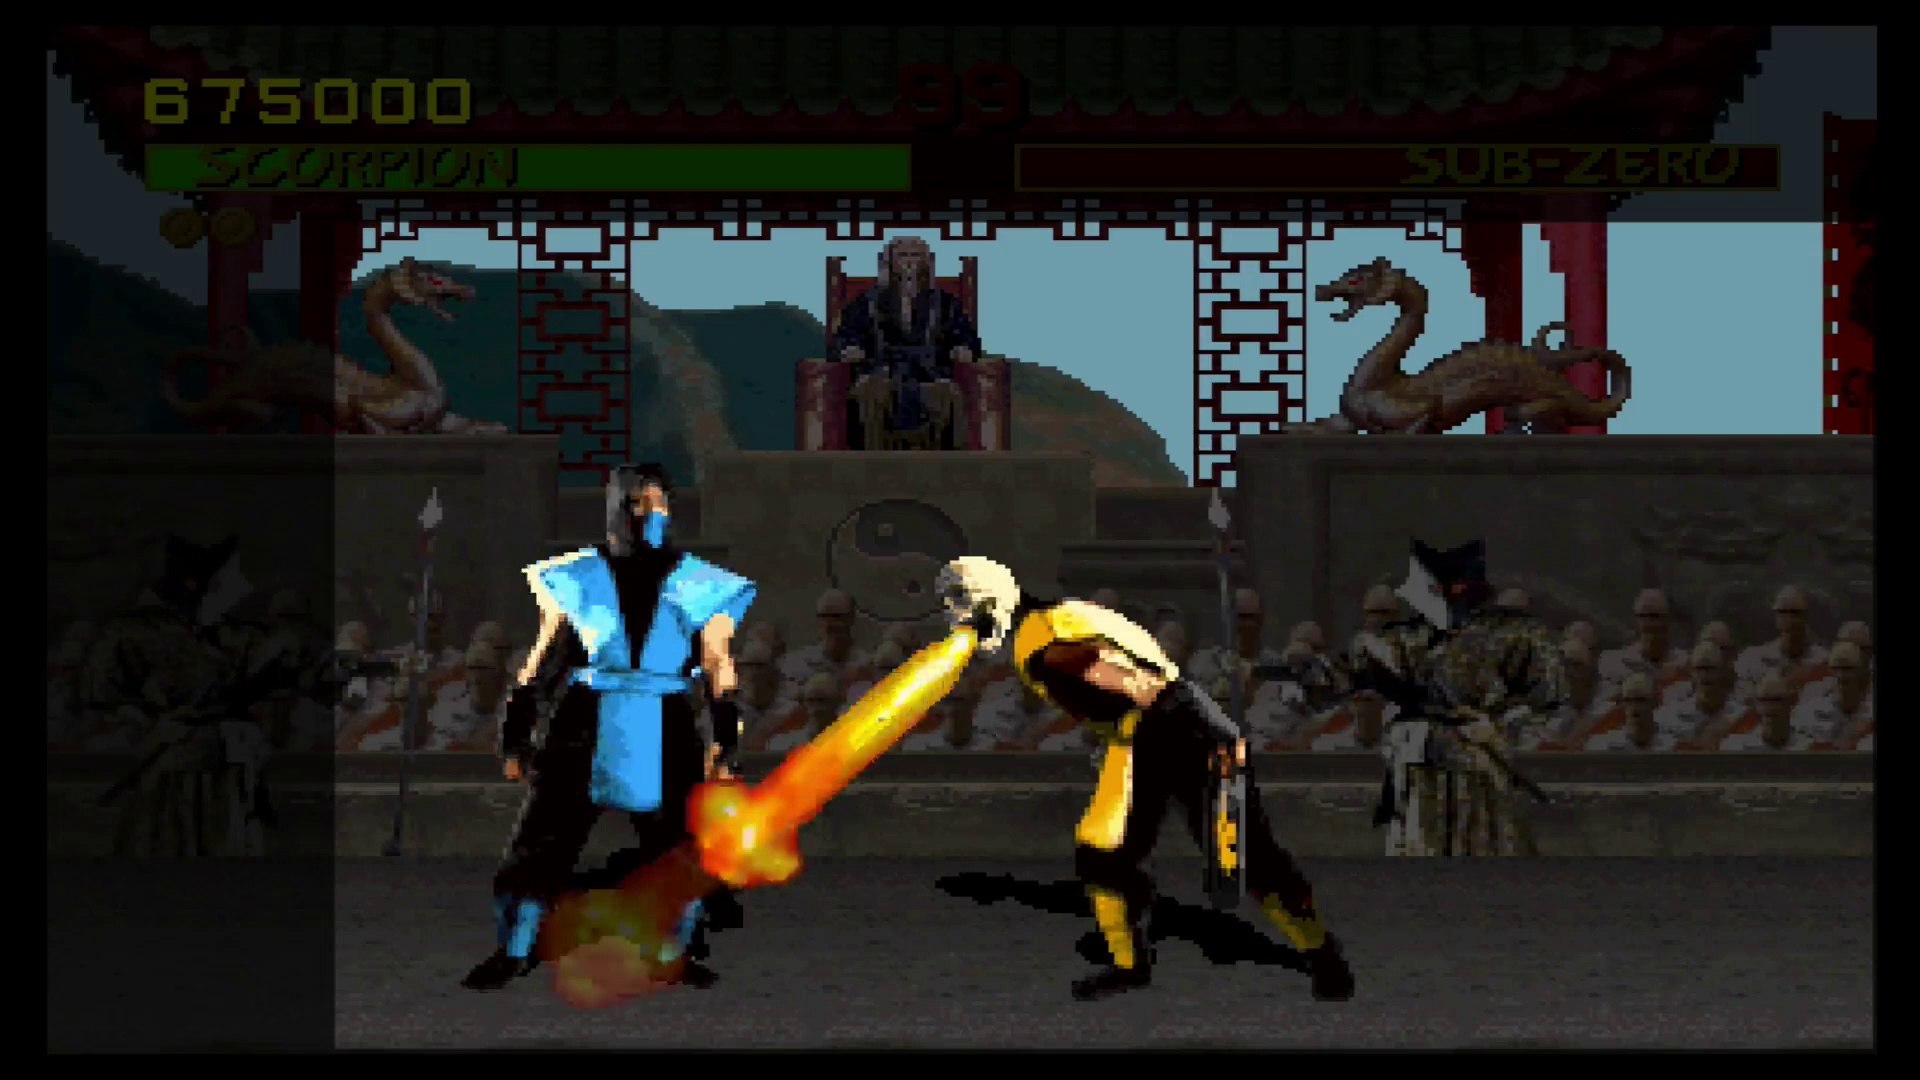 Mortal Kombat - Monday 10th August, 1992 - Revision 5.0 T Unit - Friday  19th March, 1993 - Scorpion - Arcade - Full Playthrough (USA Version) -  With Fatality Callouts - video Dailymotion